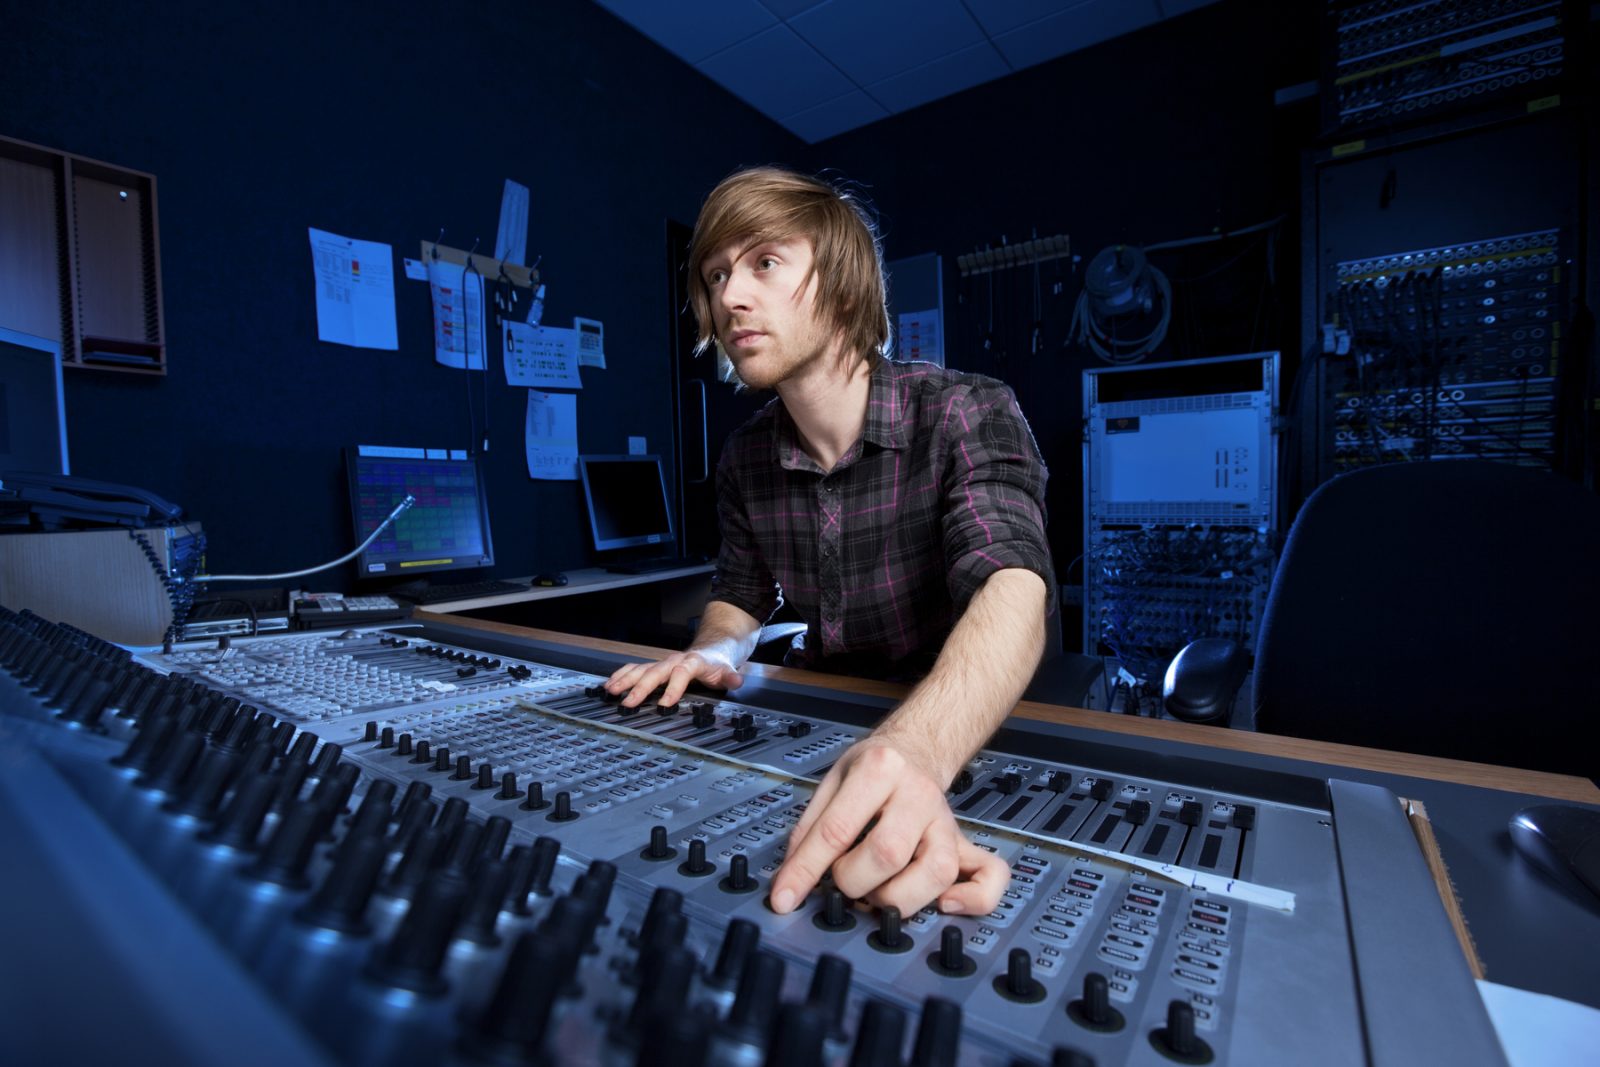 How do you become a Mastering Engineer